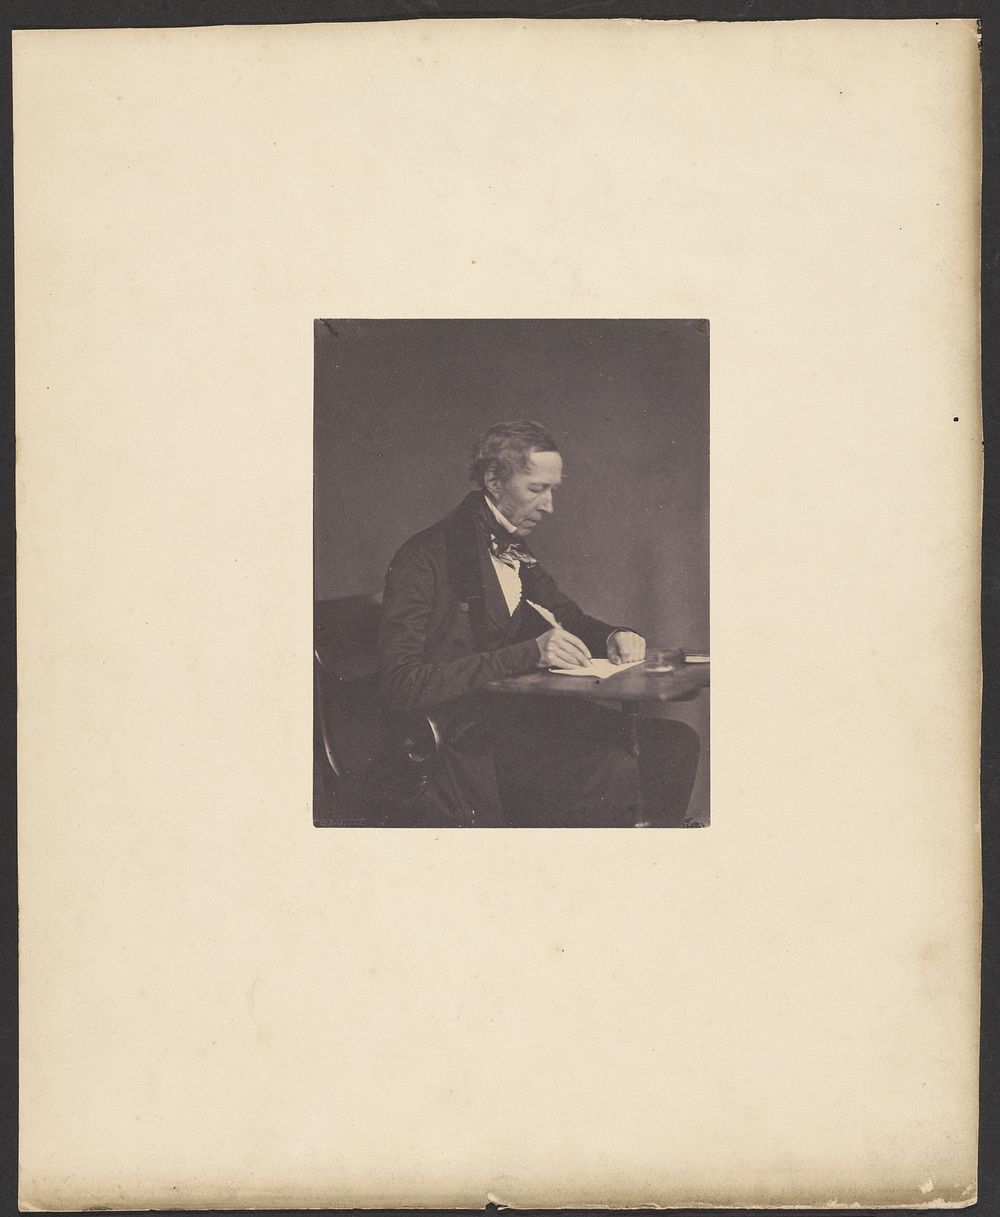 Portrait of a man writing by James G Tunny